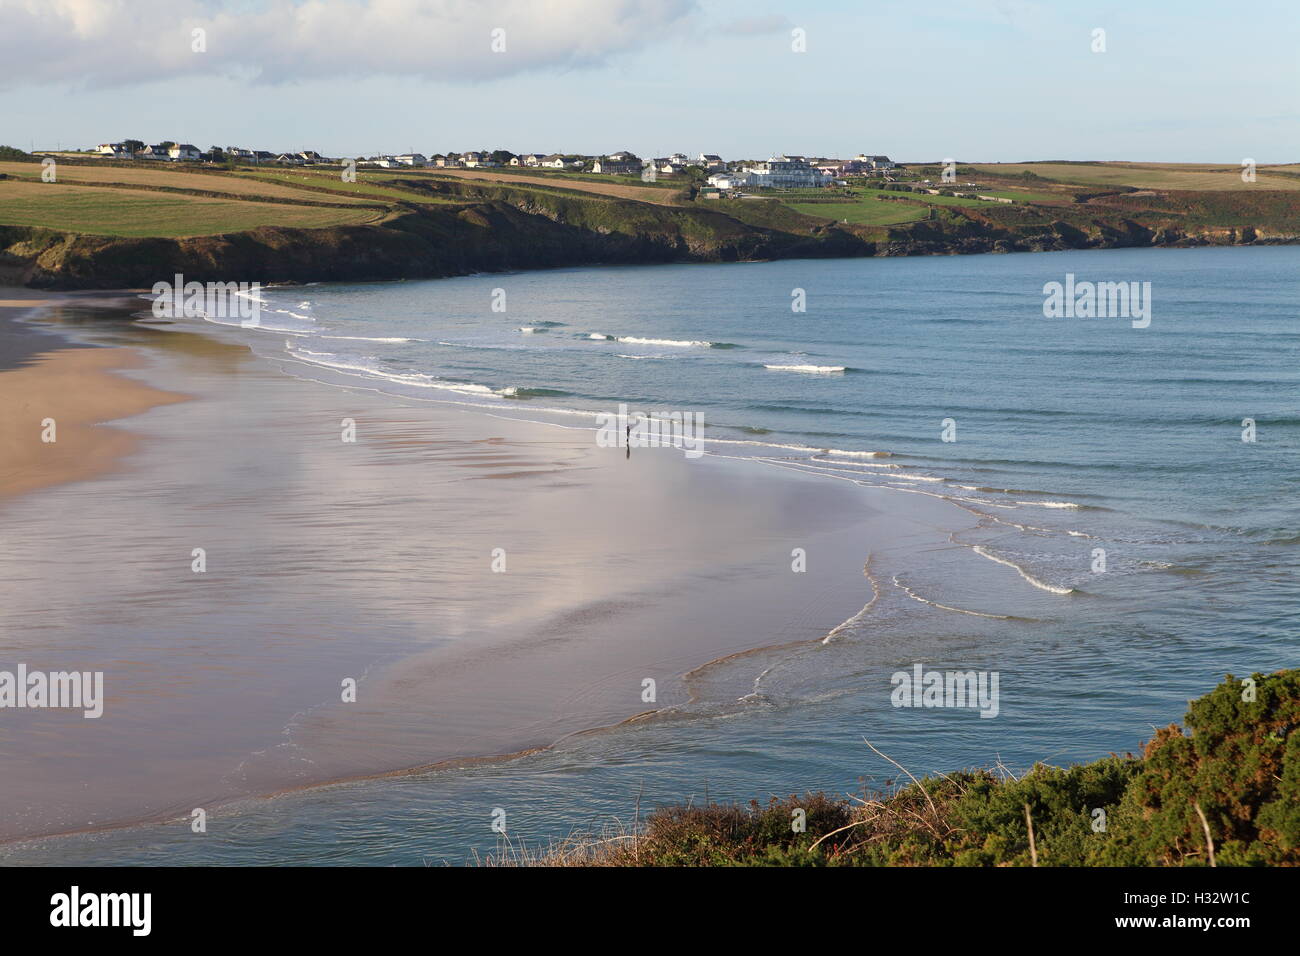 PENTIRE, NEWQUAY, CORNWALL, UK - OCTOBER 3, 2016: Early morning views along Pentire in Newquay, and out over the River Gannel Stock Photo